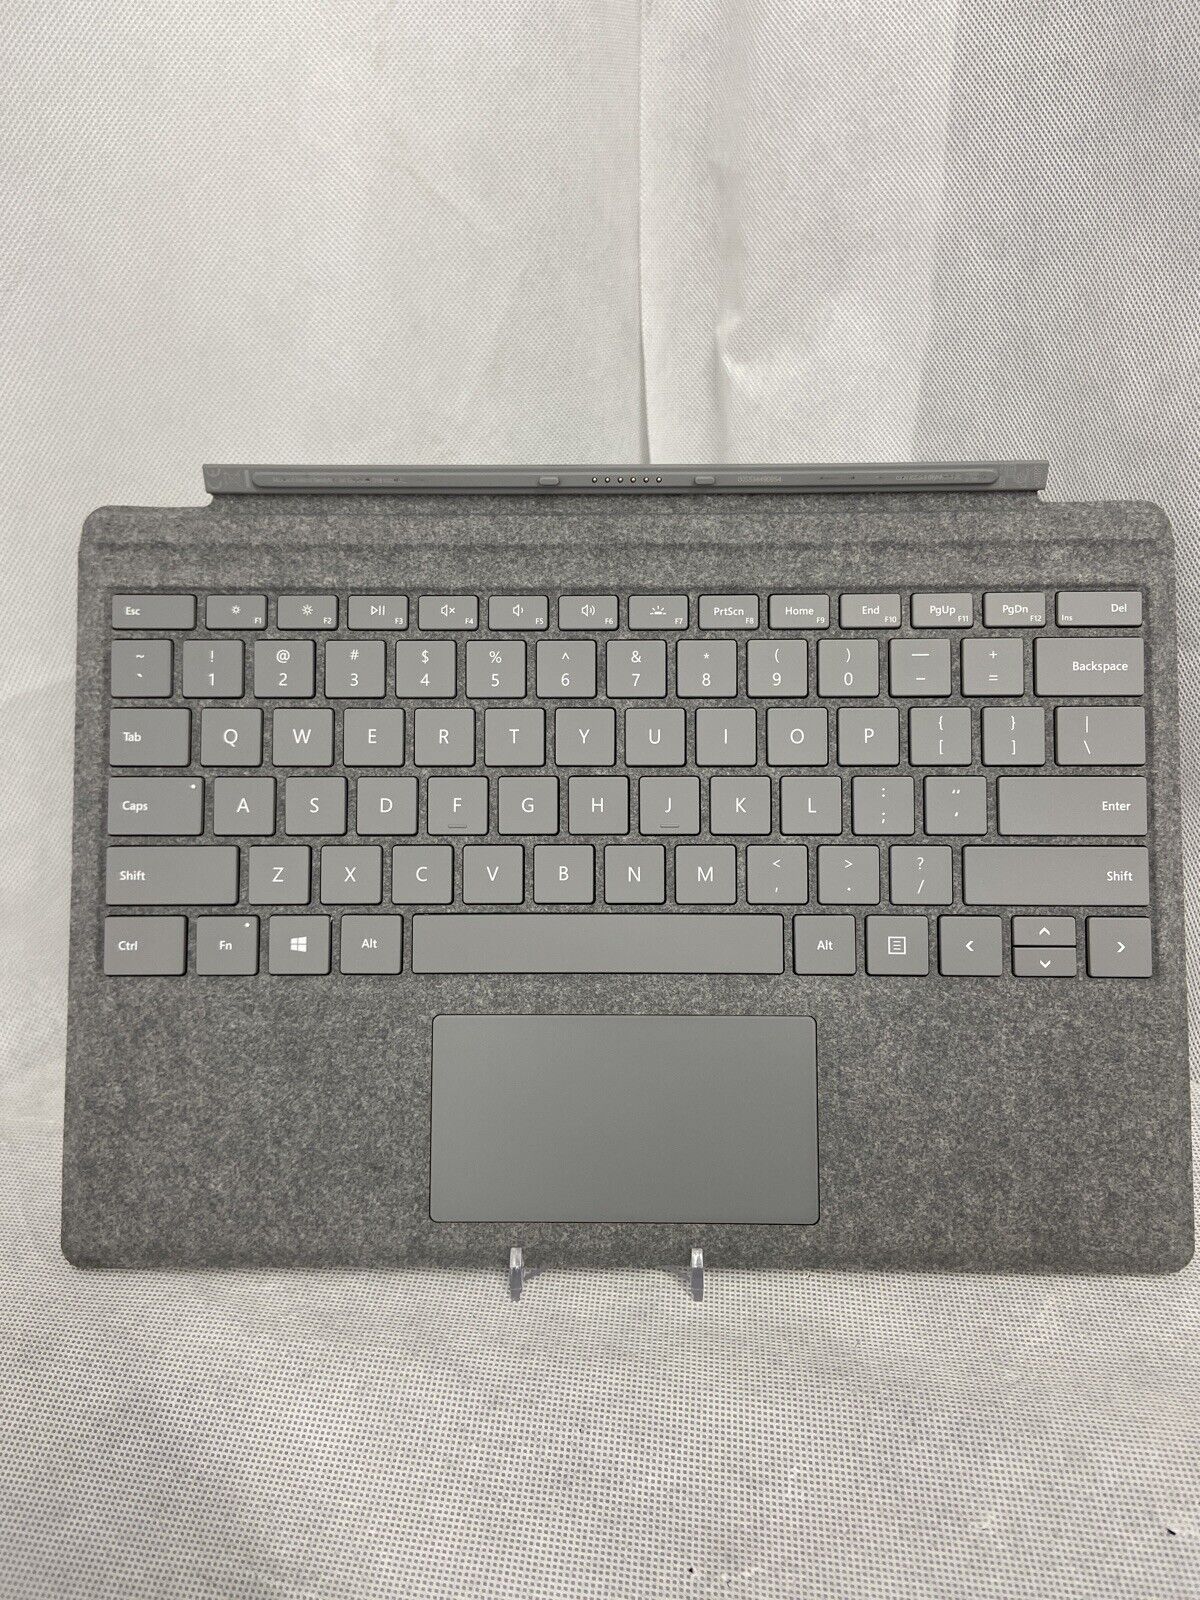 Microsoft Surface Pro 3, 4, 5, 6 Type Cover Backlit Keyboard Model 1725 - Gray